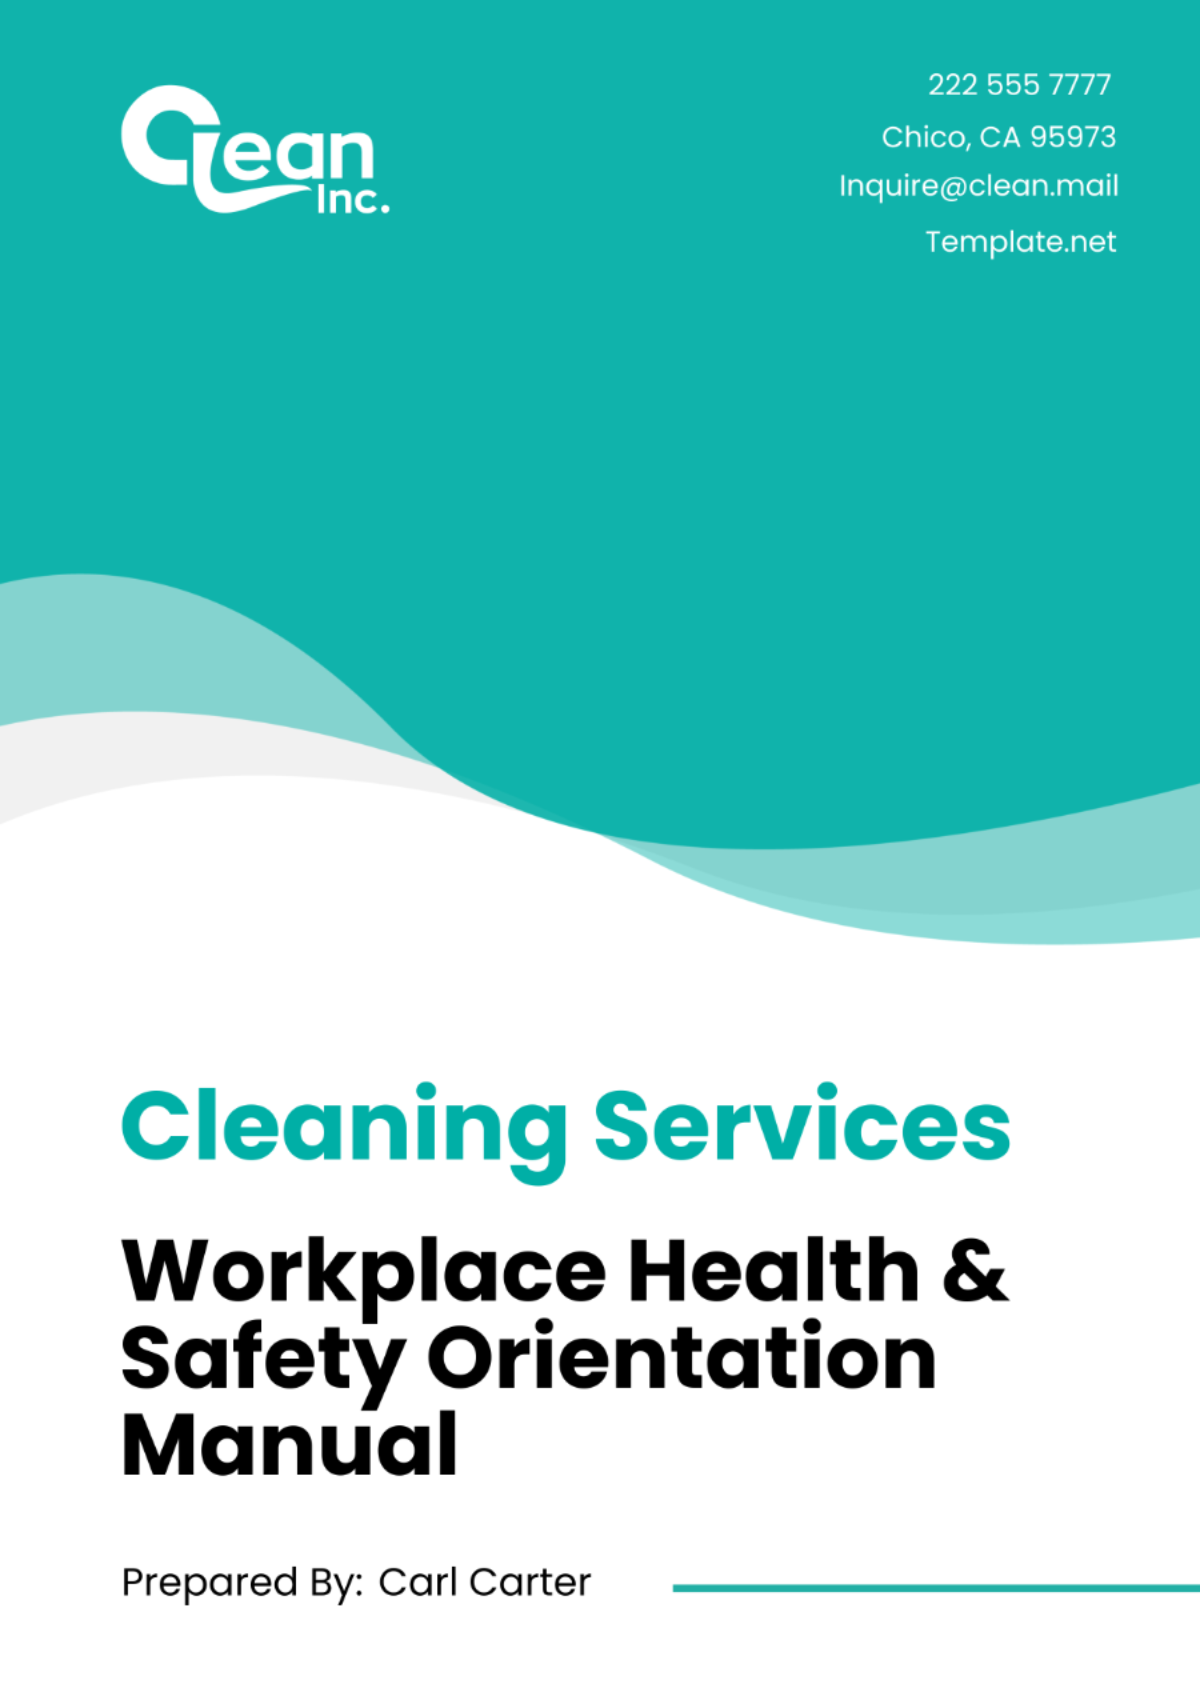 Cleaning Services Workplace Health & Safety Orientation Manual Template